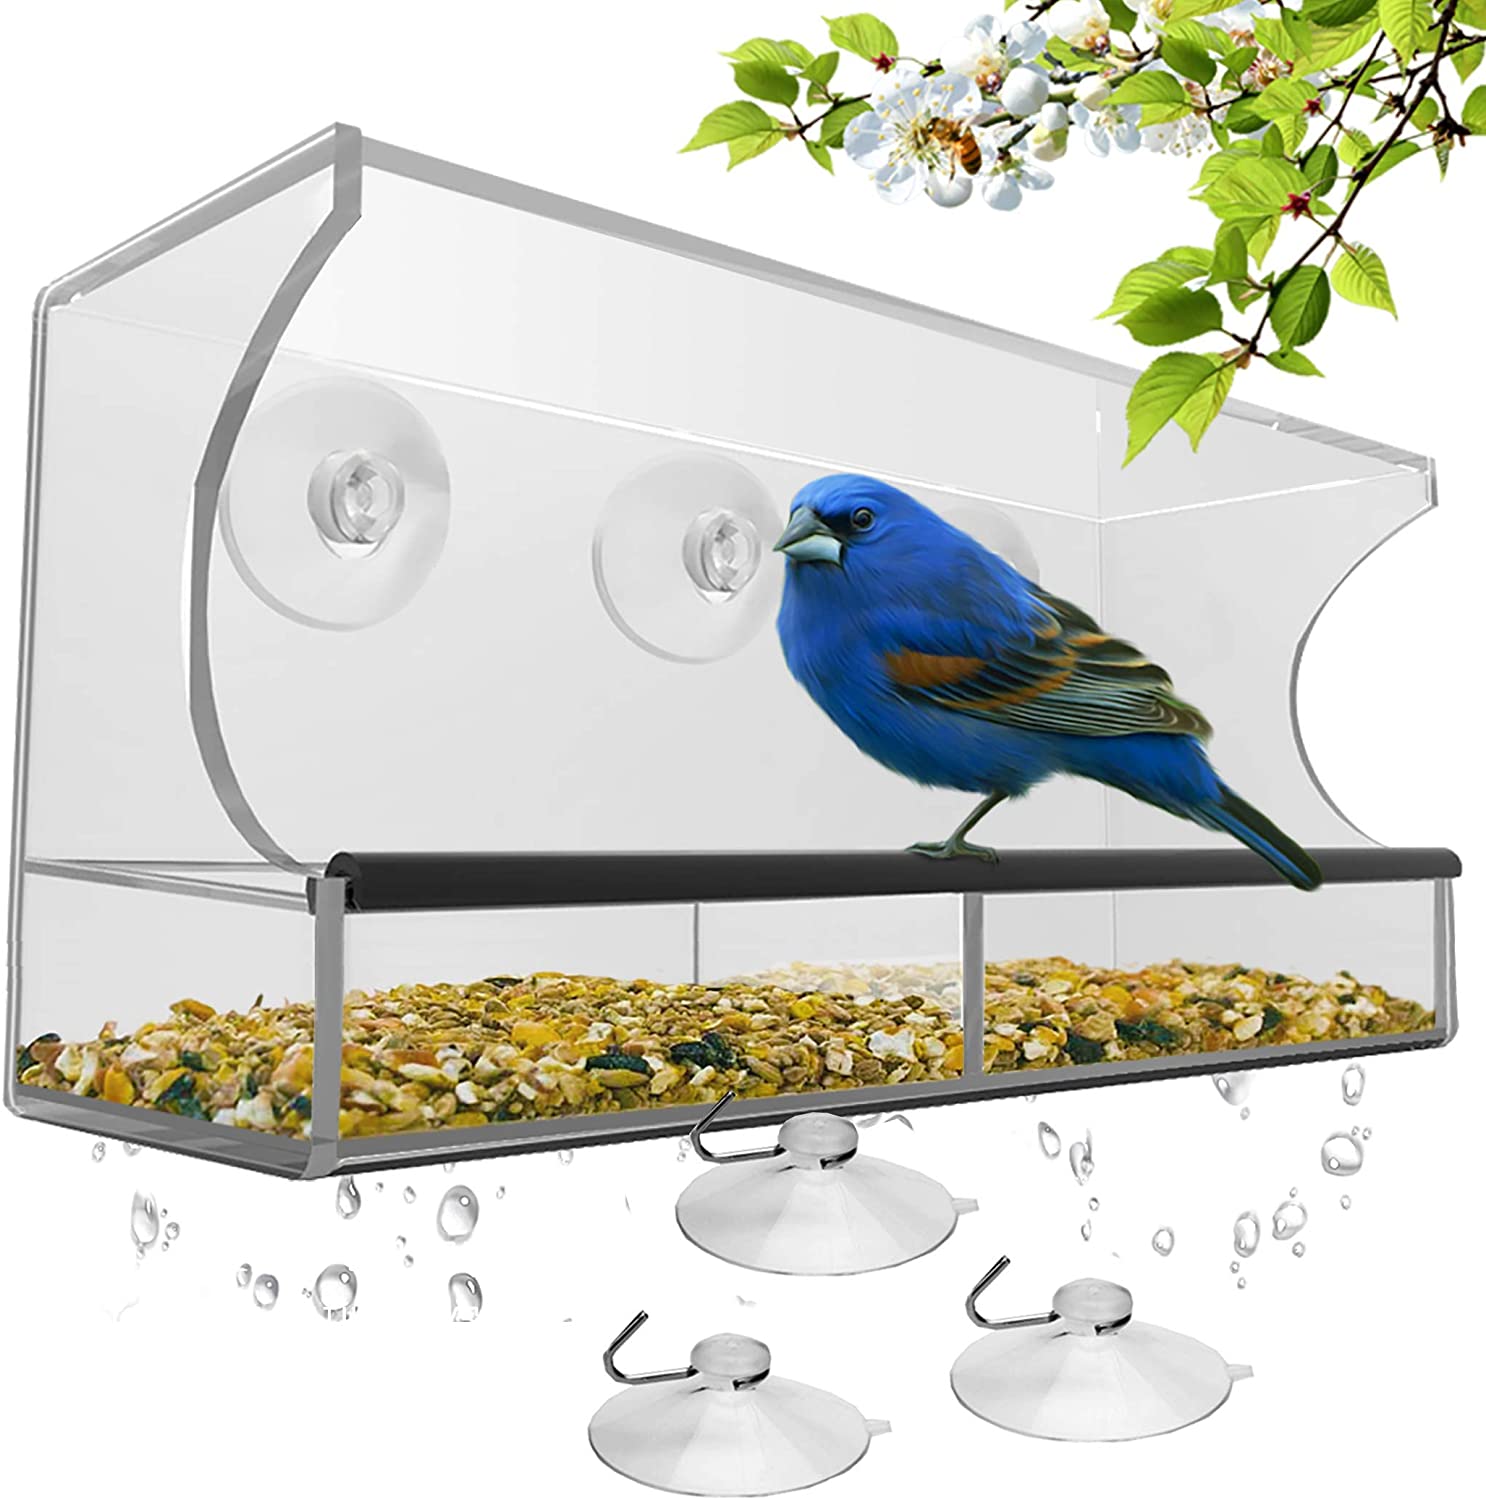 Window Bird Feeder with Strong Suction Cups and Seed Tray, Outdoor Birdfeeders for Wild Birds, Finch, Cardinal, and Bluebird. Large Outside Hanging Birdhouse Kits, Drain Holes, 3 Extra Suction Cups